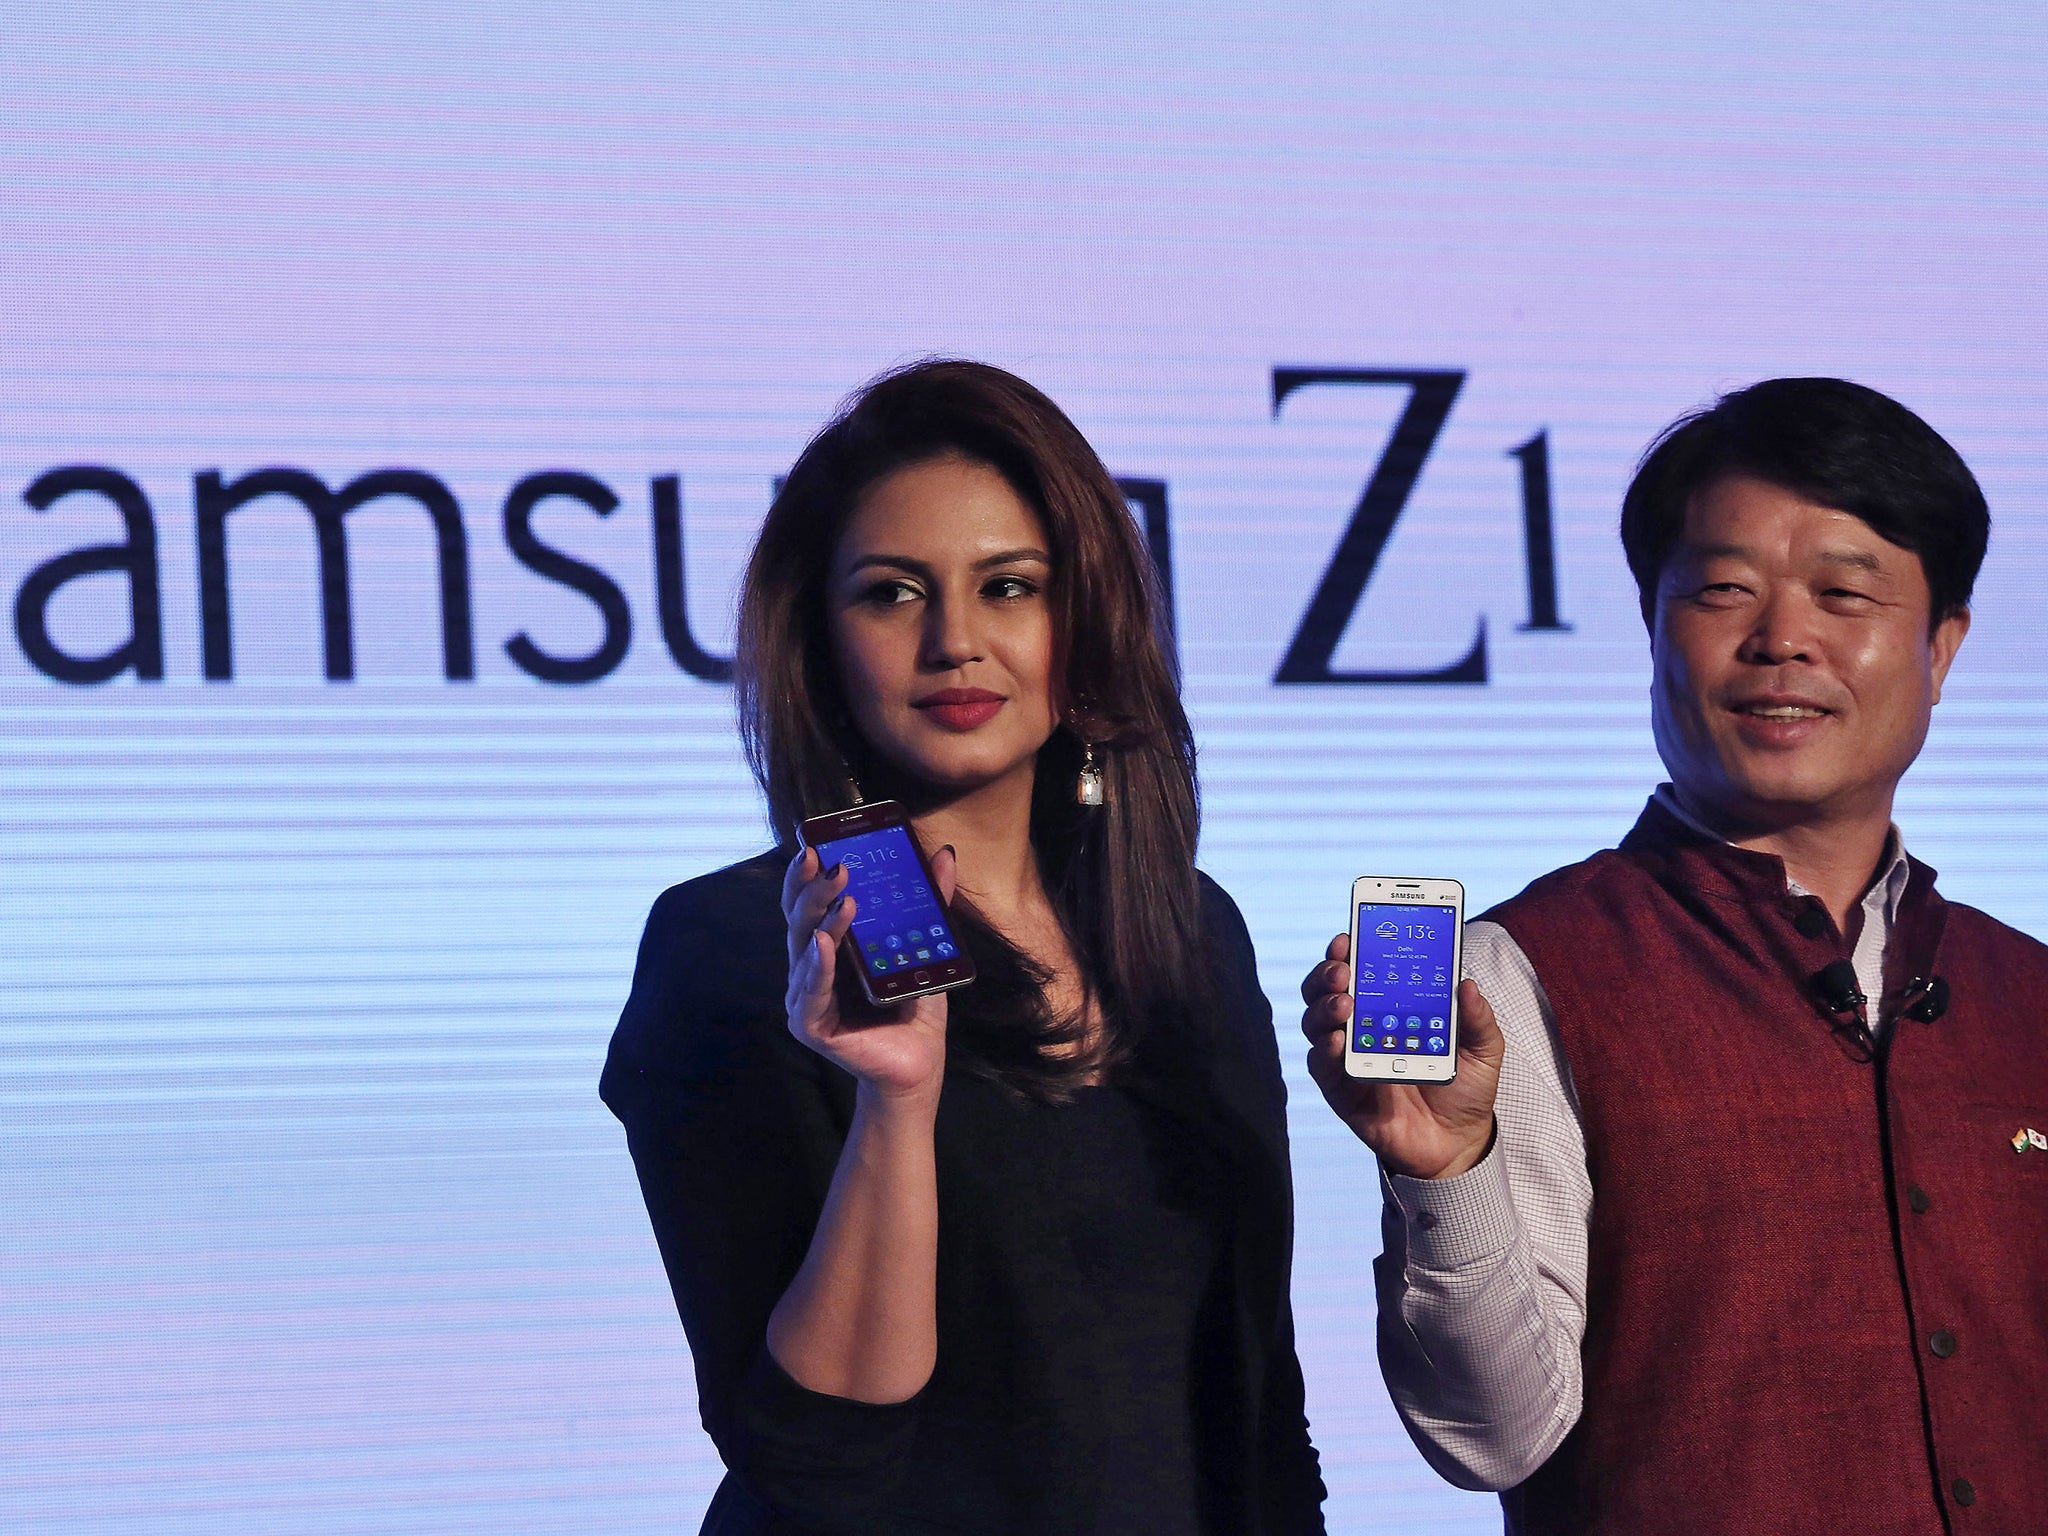 Samsung Z1 at its release